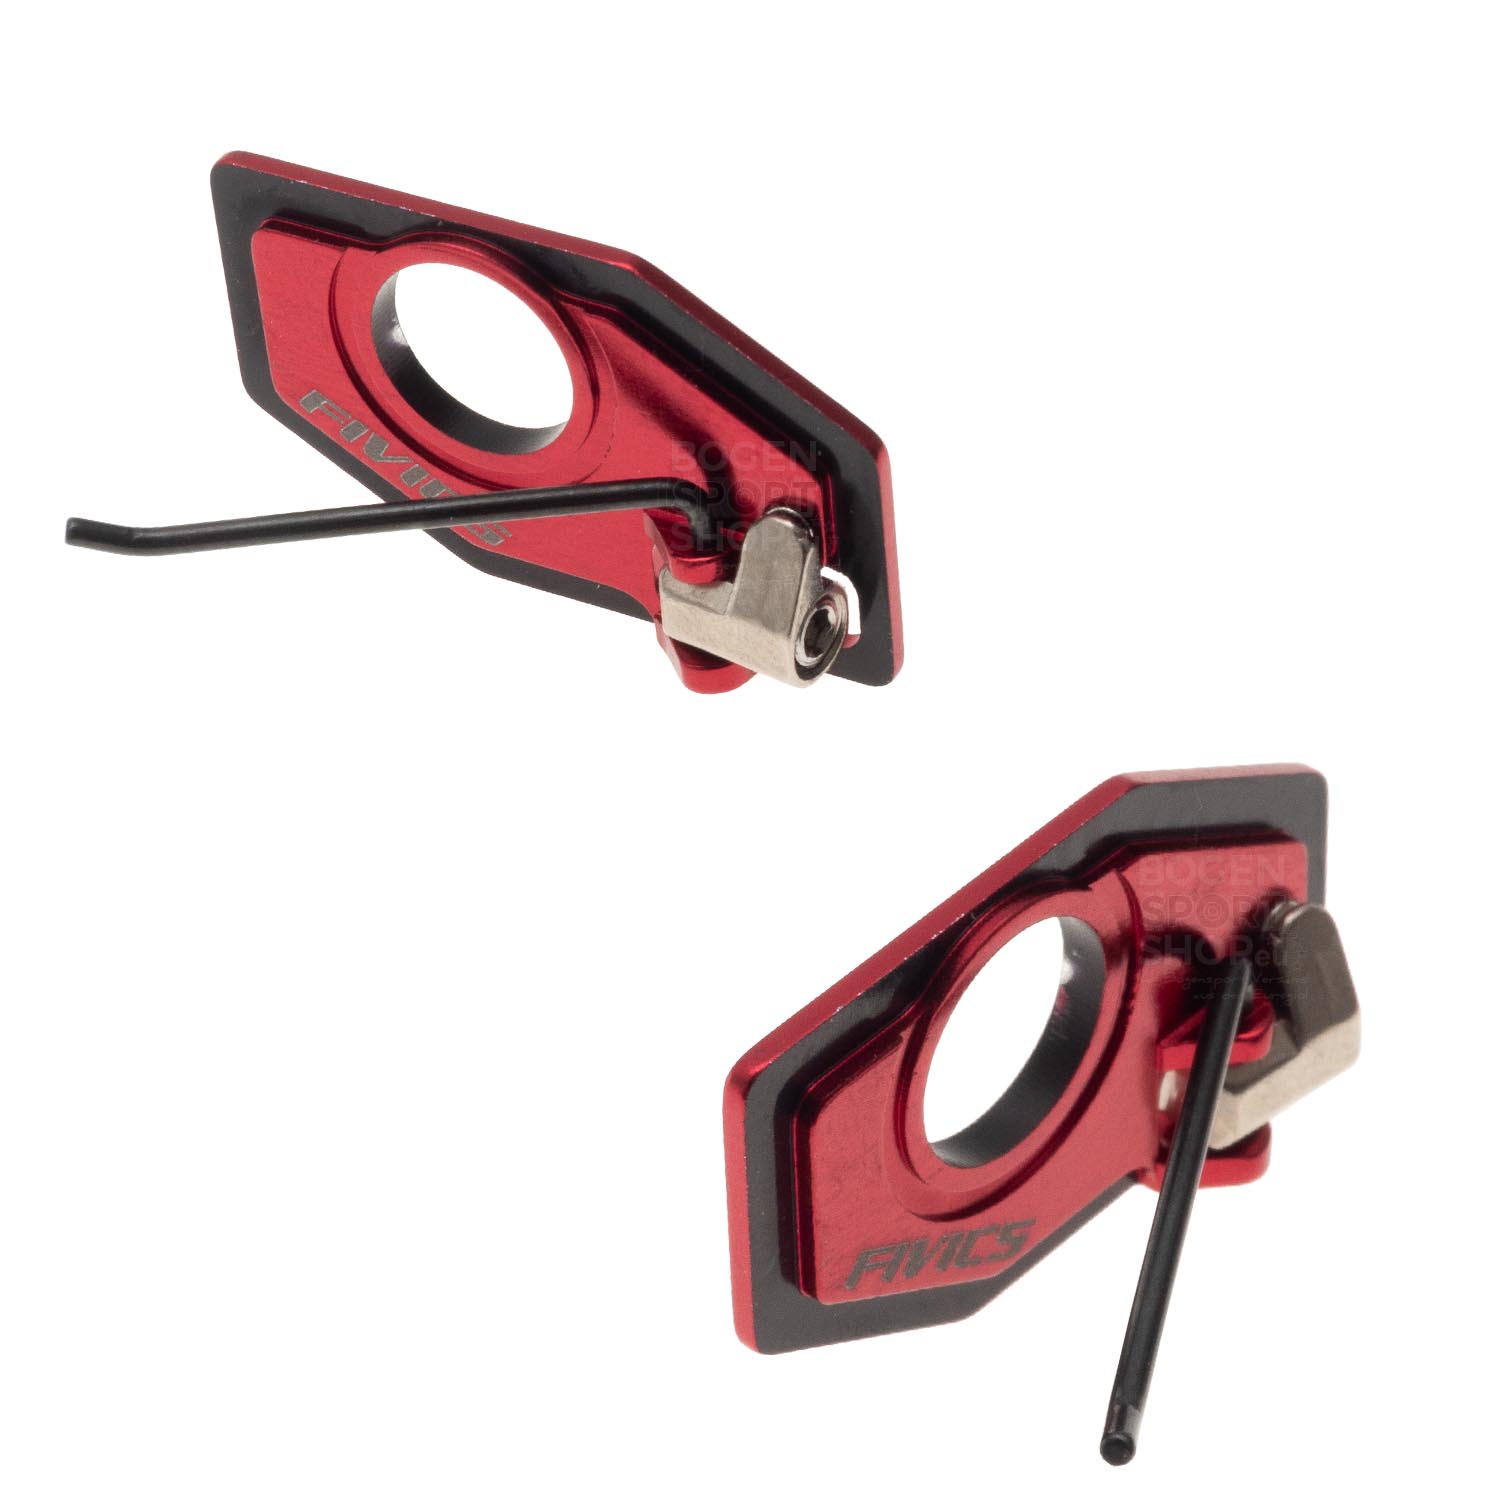  Buy Archery Recurve and Arrow Rests Online.